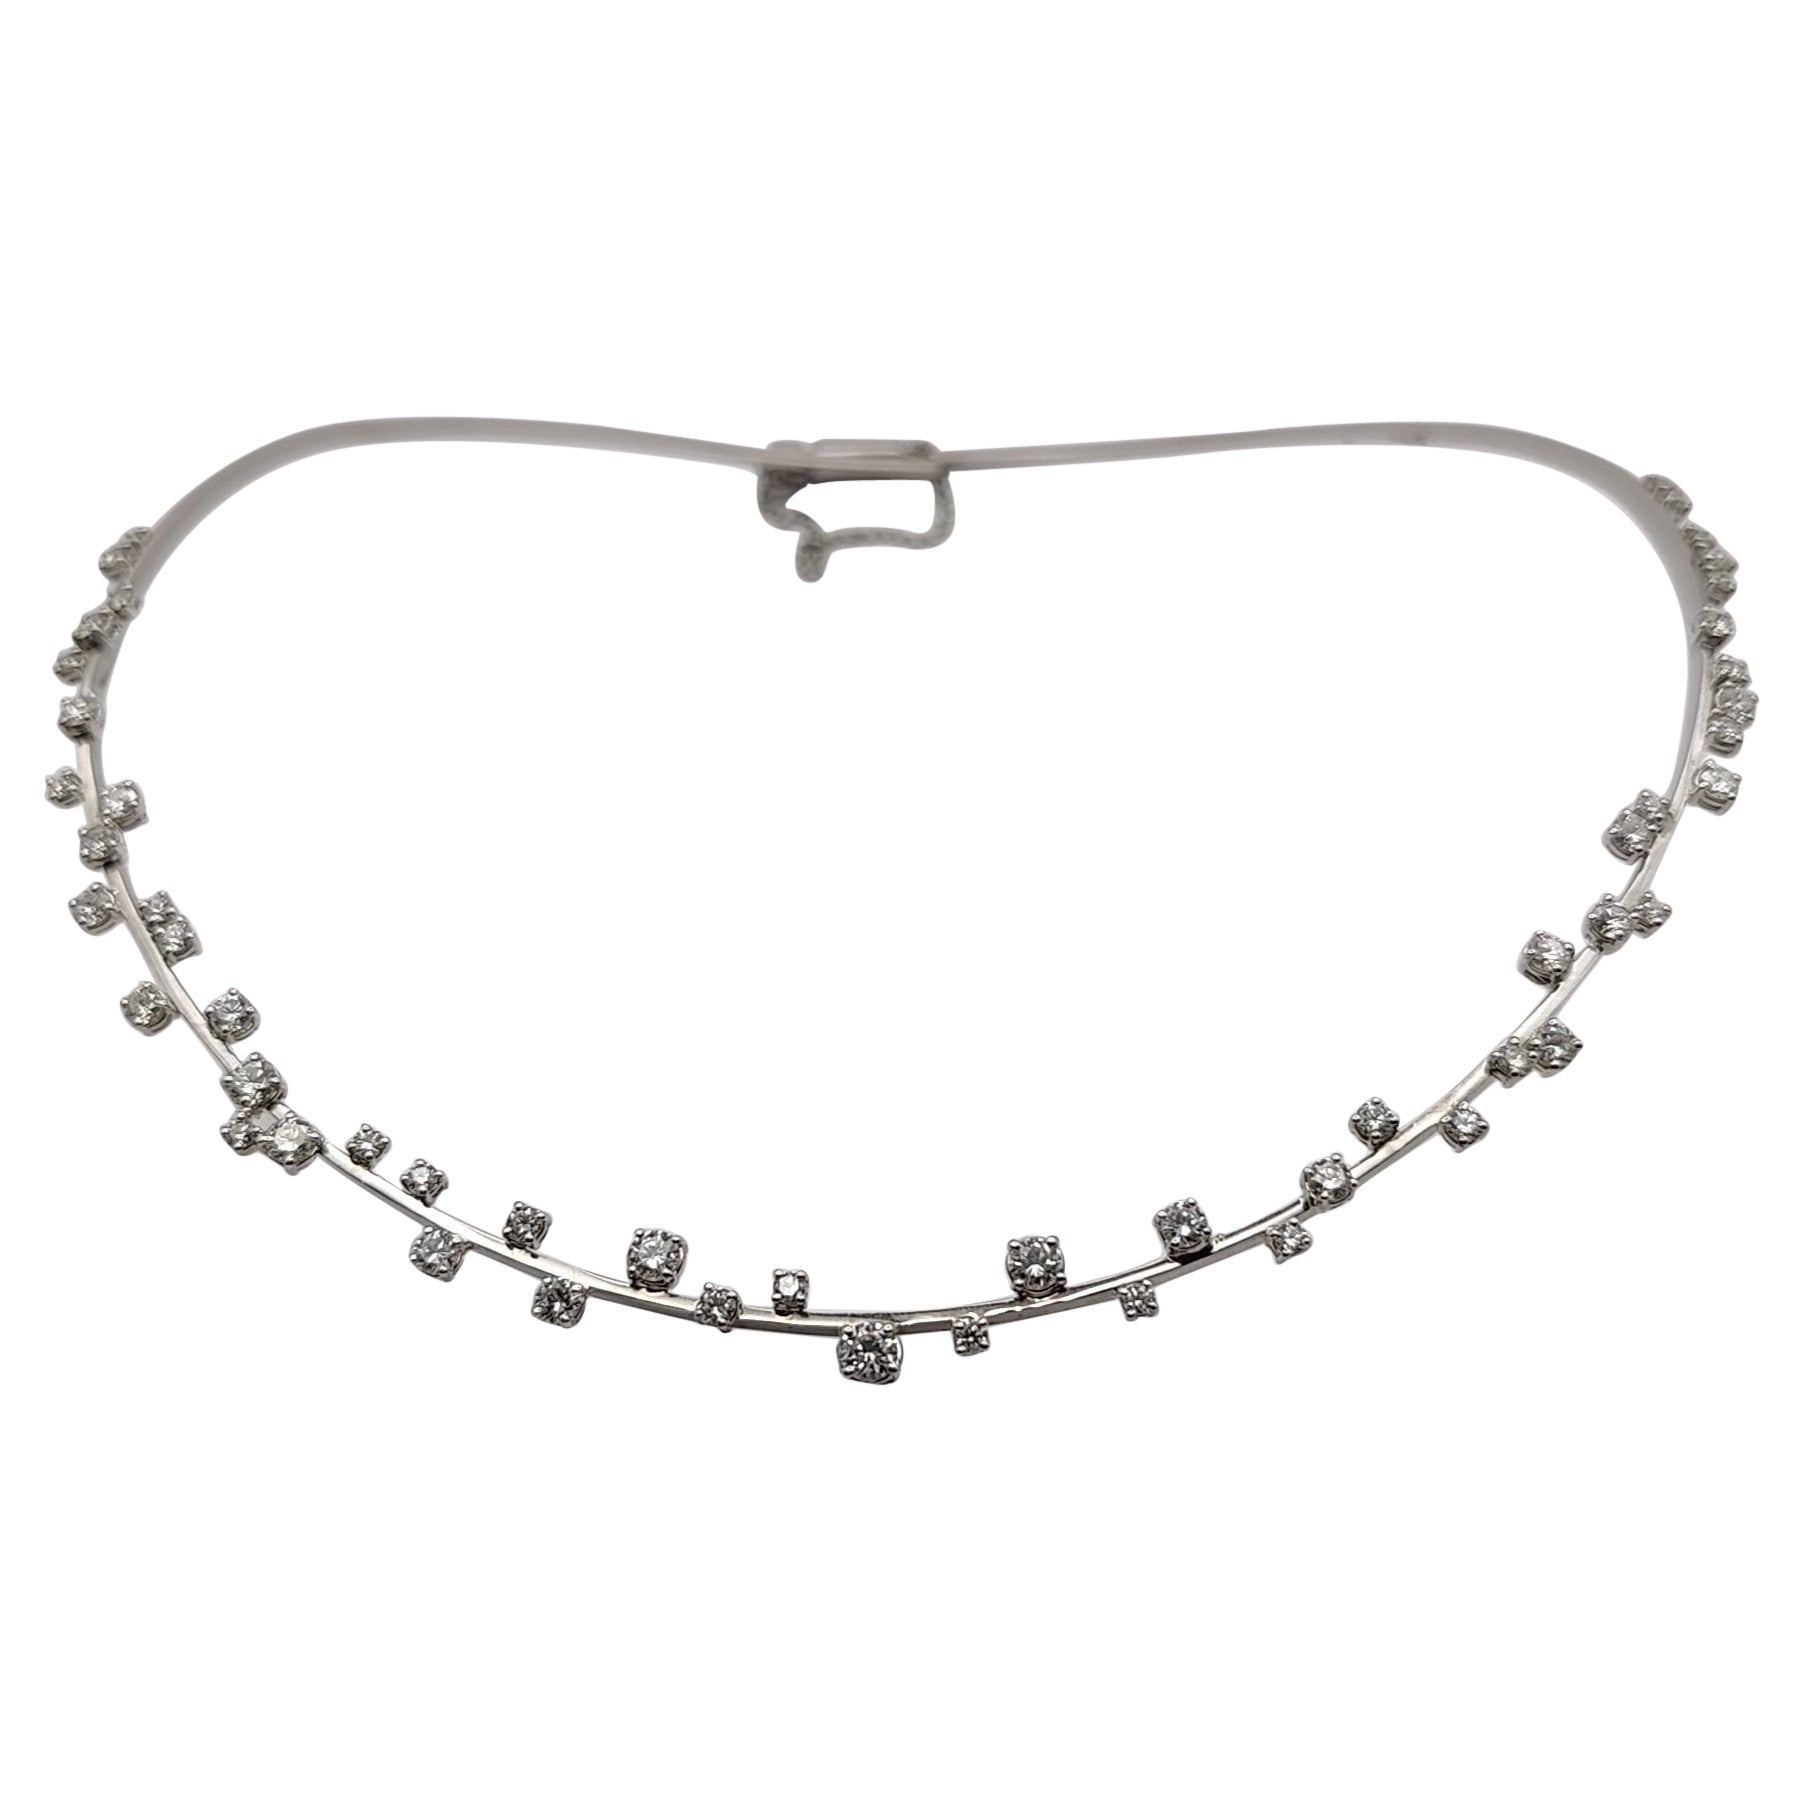 21st Century 3.33 Carat Diamond Choker Necklace in 18K White Gold For Sale